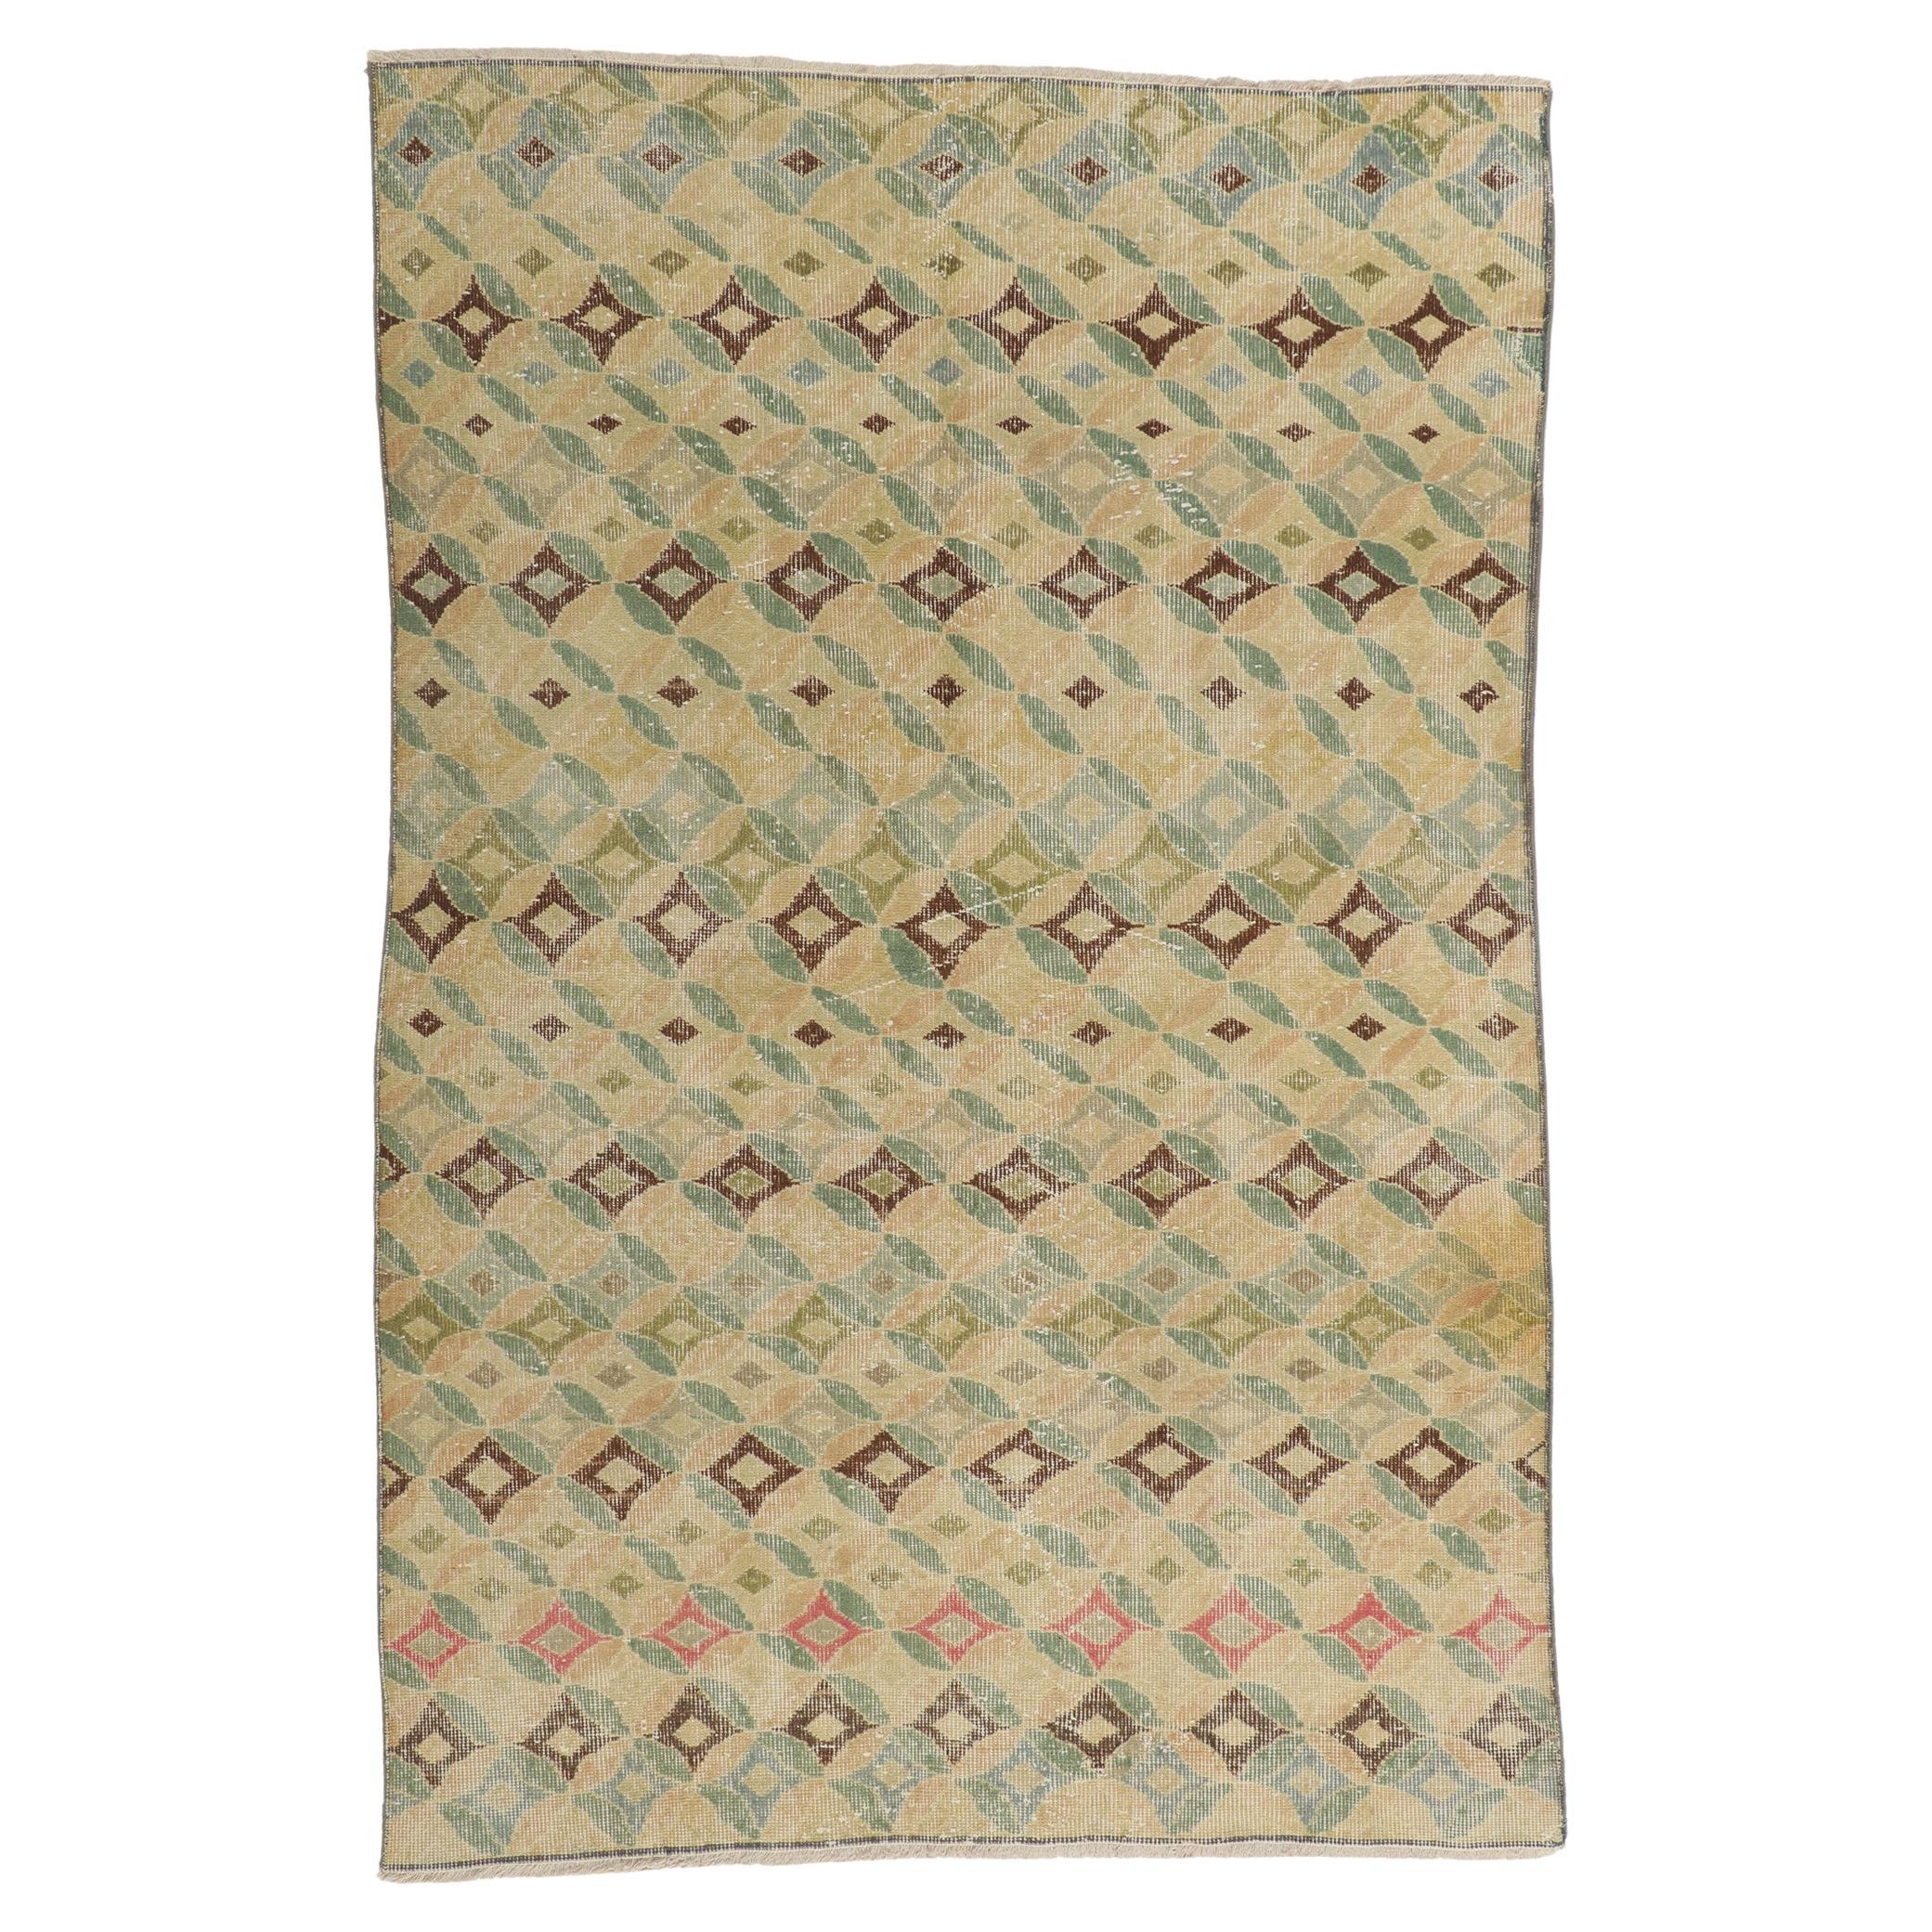 Rustic Vintage Distressed Turkish Sivas Rug with Faded Earth-Tone Colors